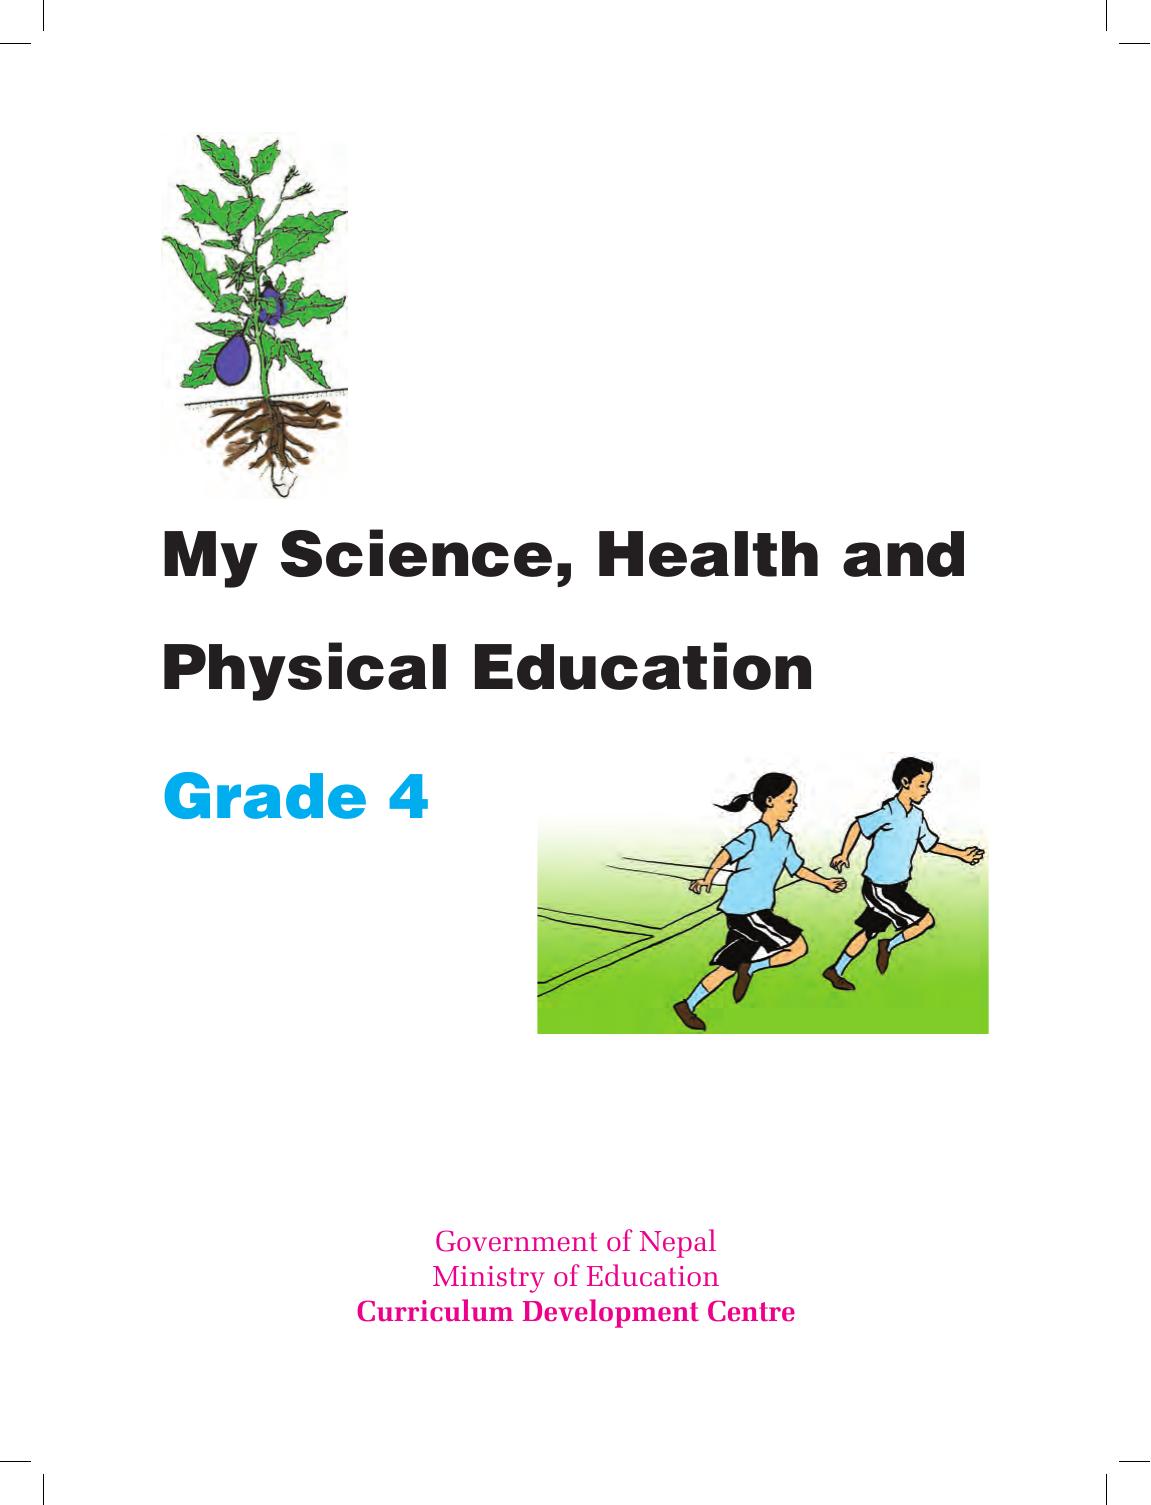 CDC 2018 - My Science, Health and Physical Education Grade 4